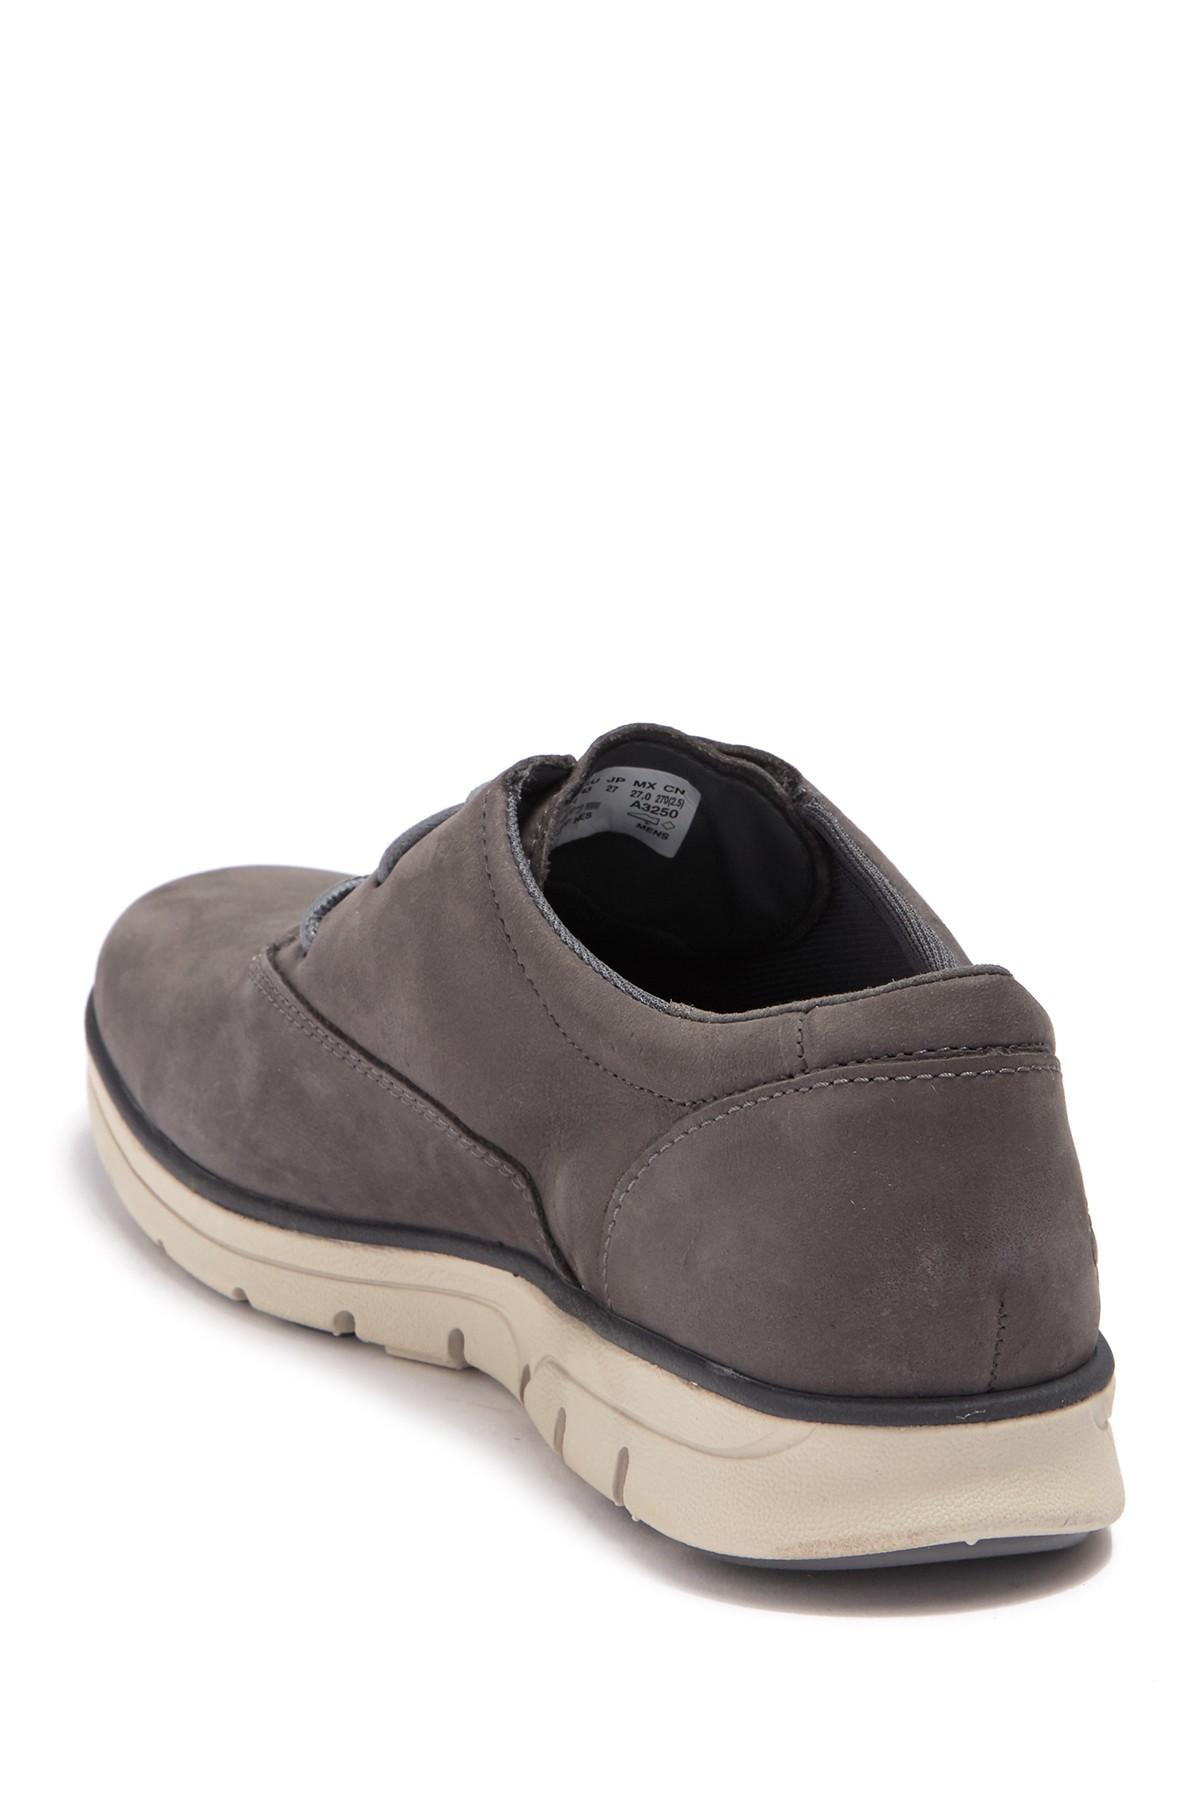 Timberland Bradstreet Oxford Leather Sneaker for Men - Lyst